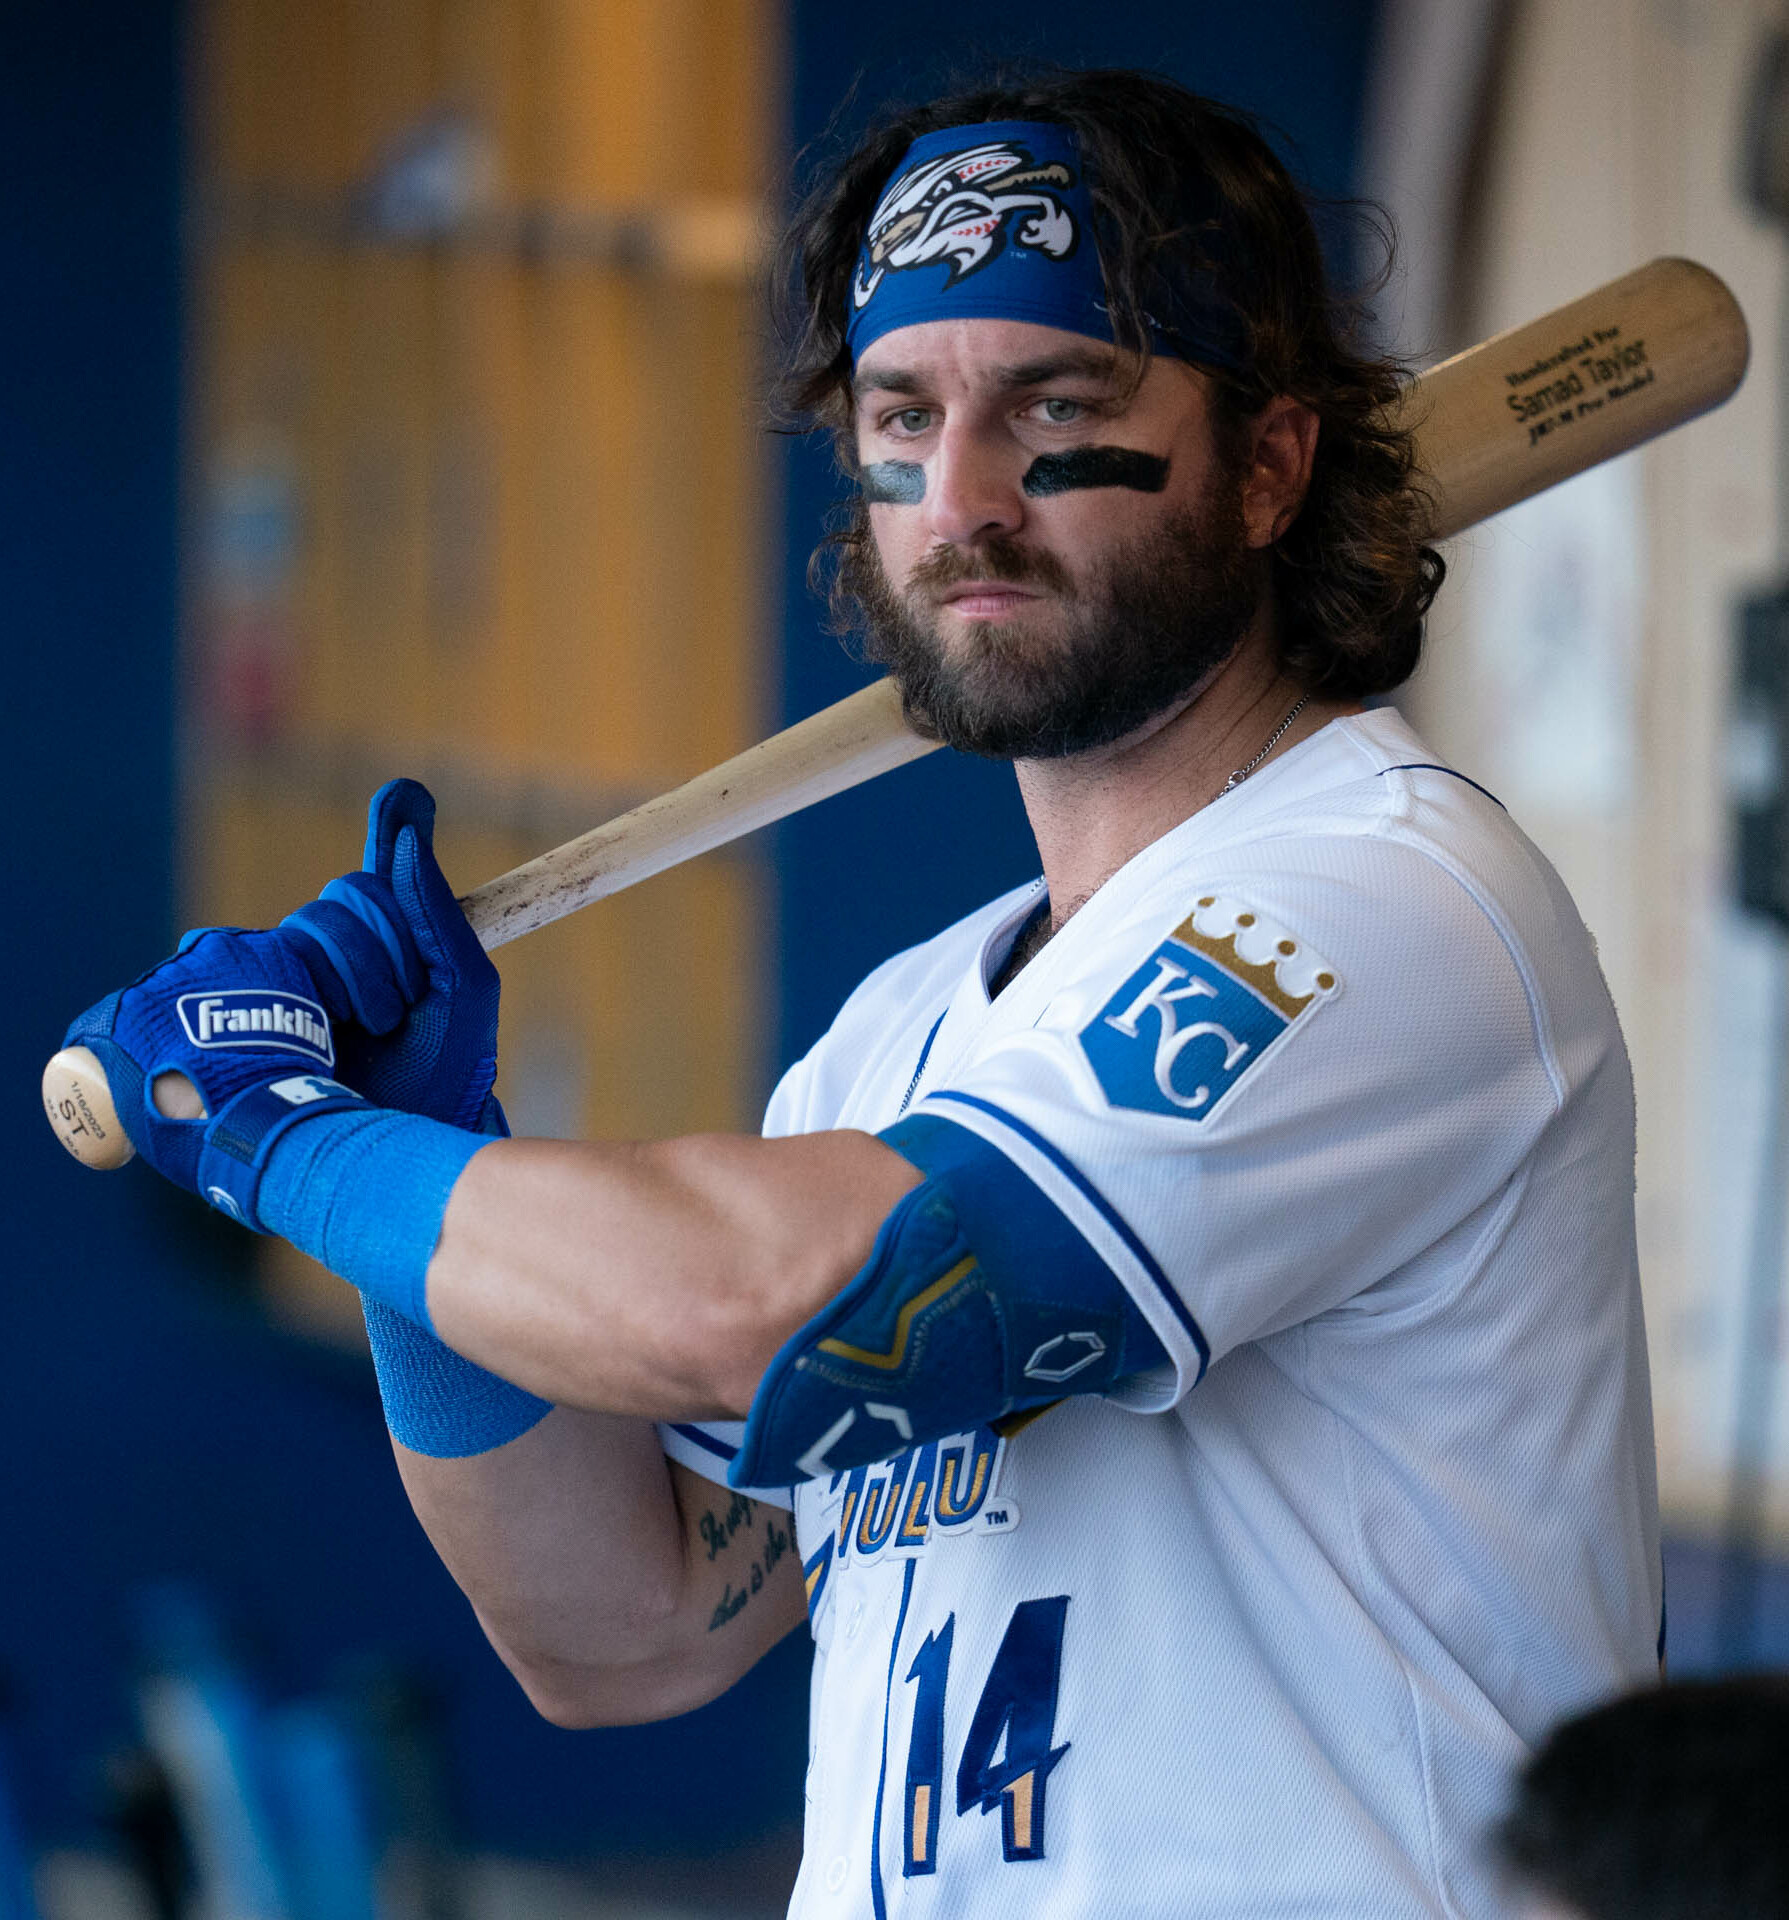 Double the Dubs: Chasers Sweep DH with Indians